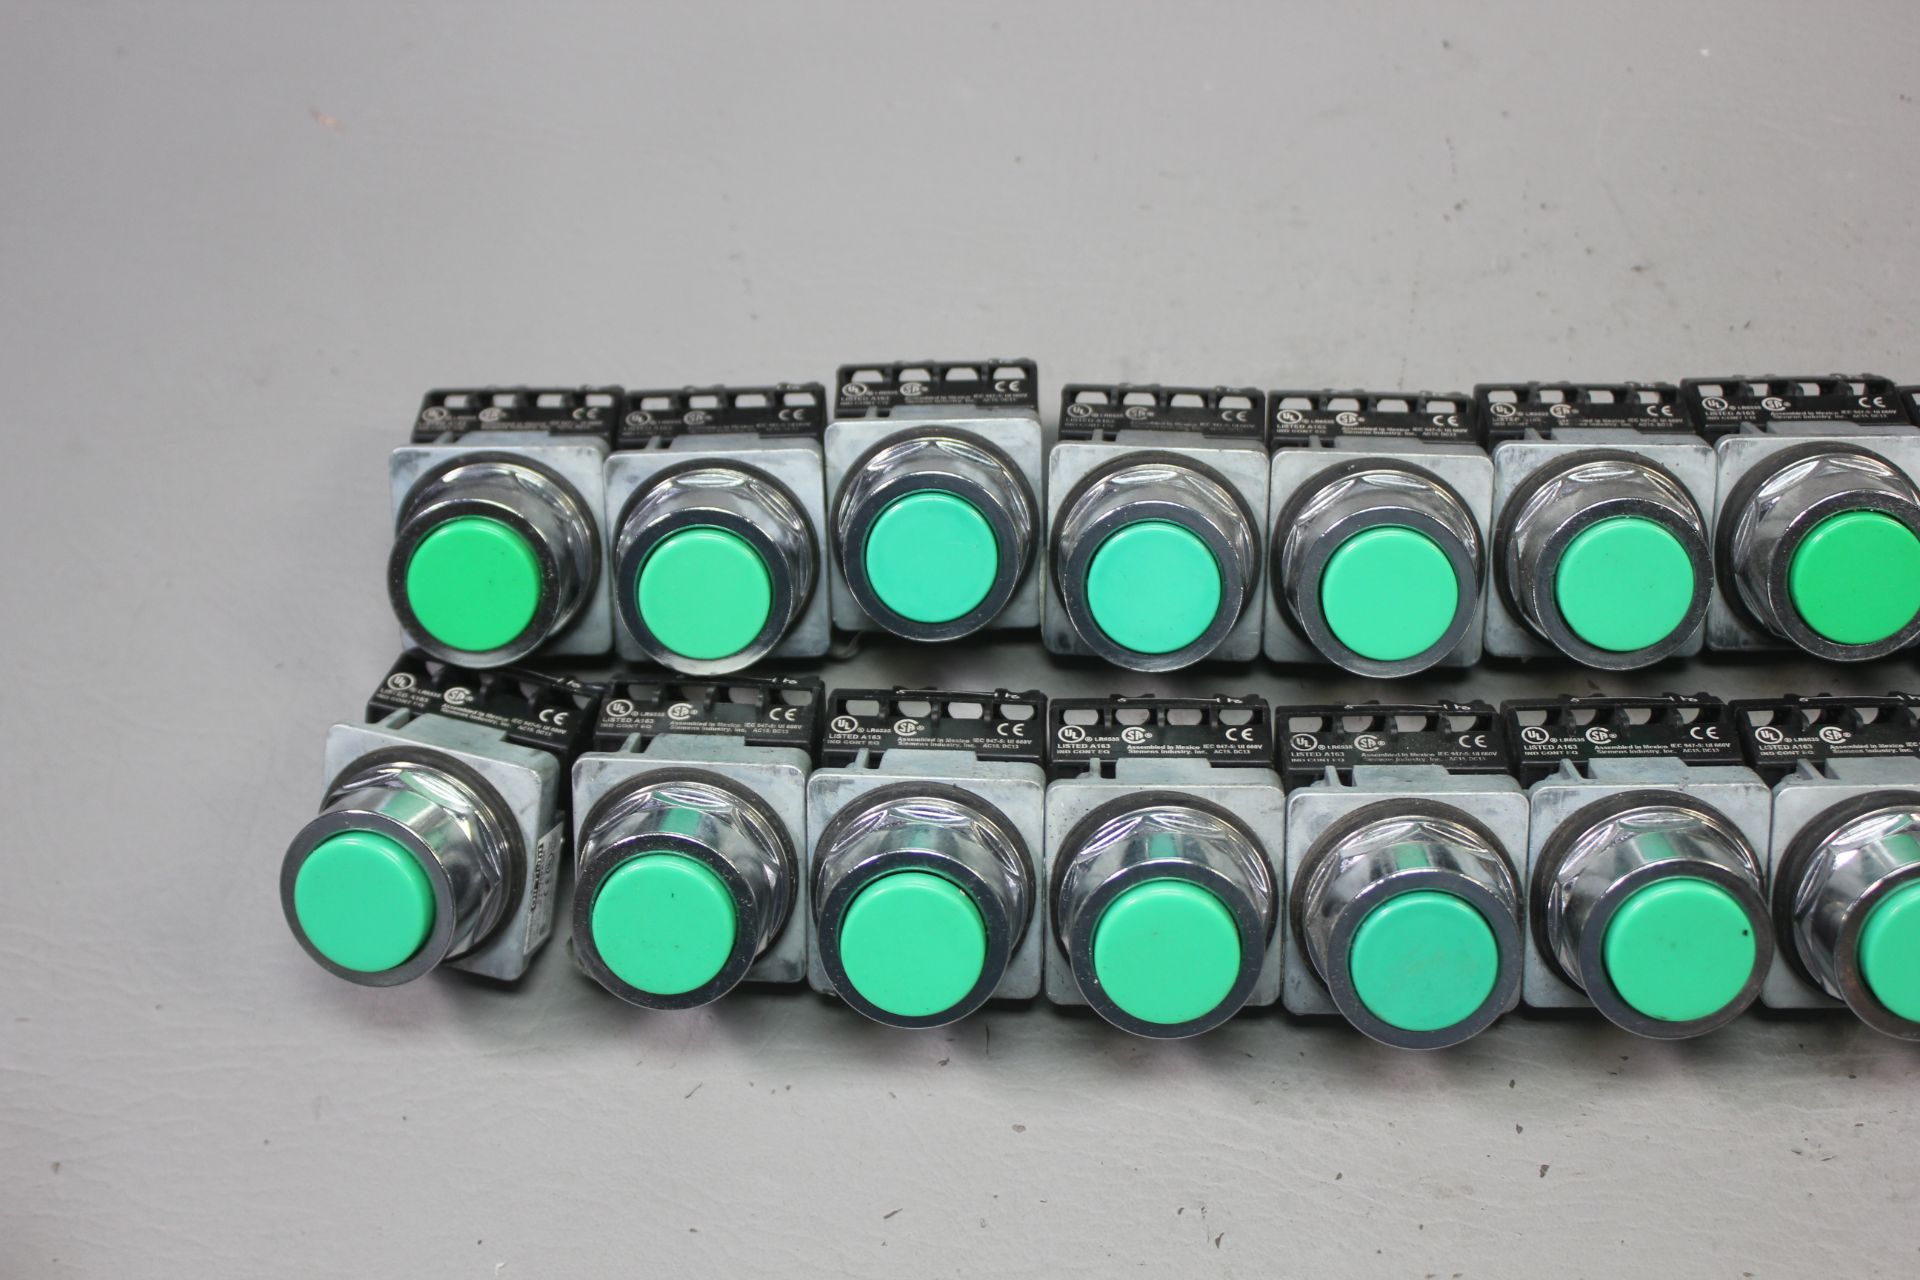 LOT OF 20 UNUSED SIEMENS GREEN OIL TIGHT PUSHBUTTONS - Image 2 of 8